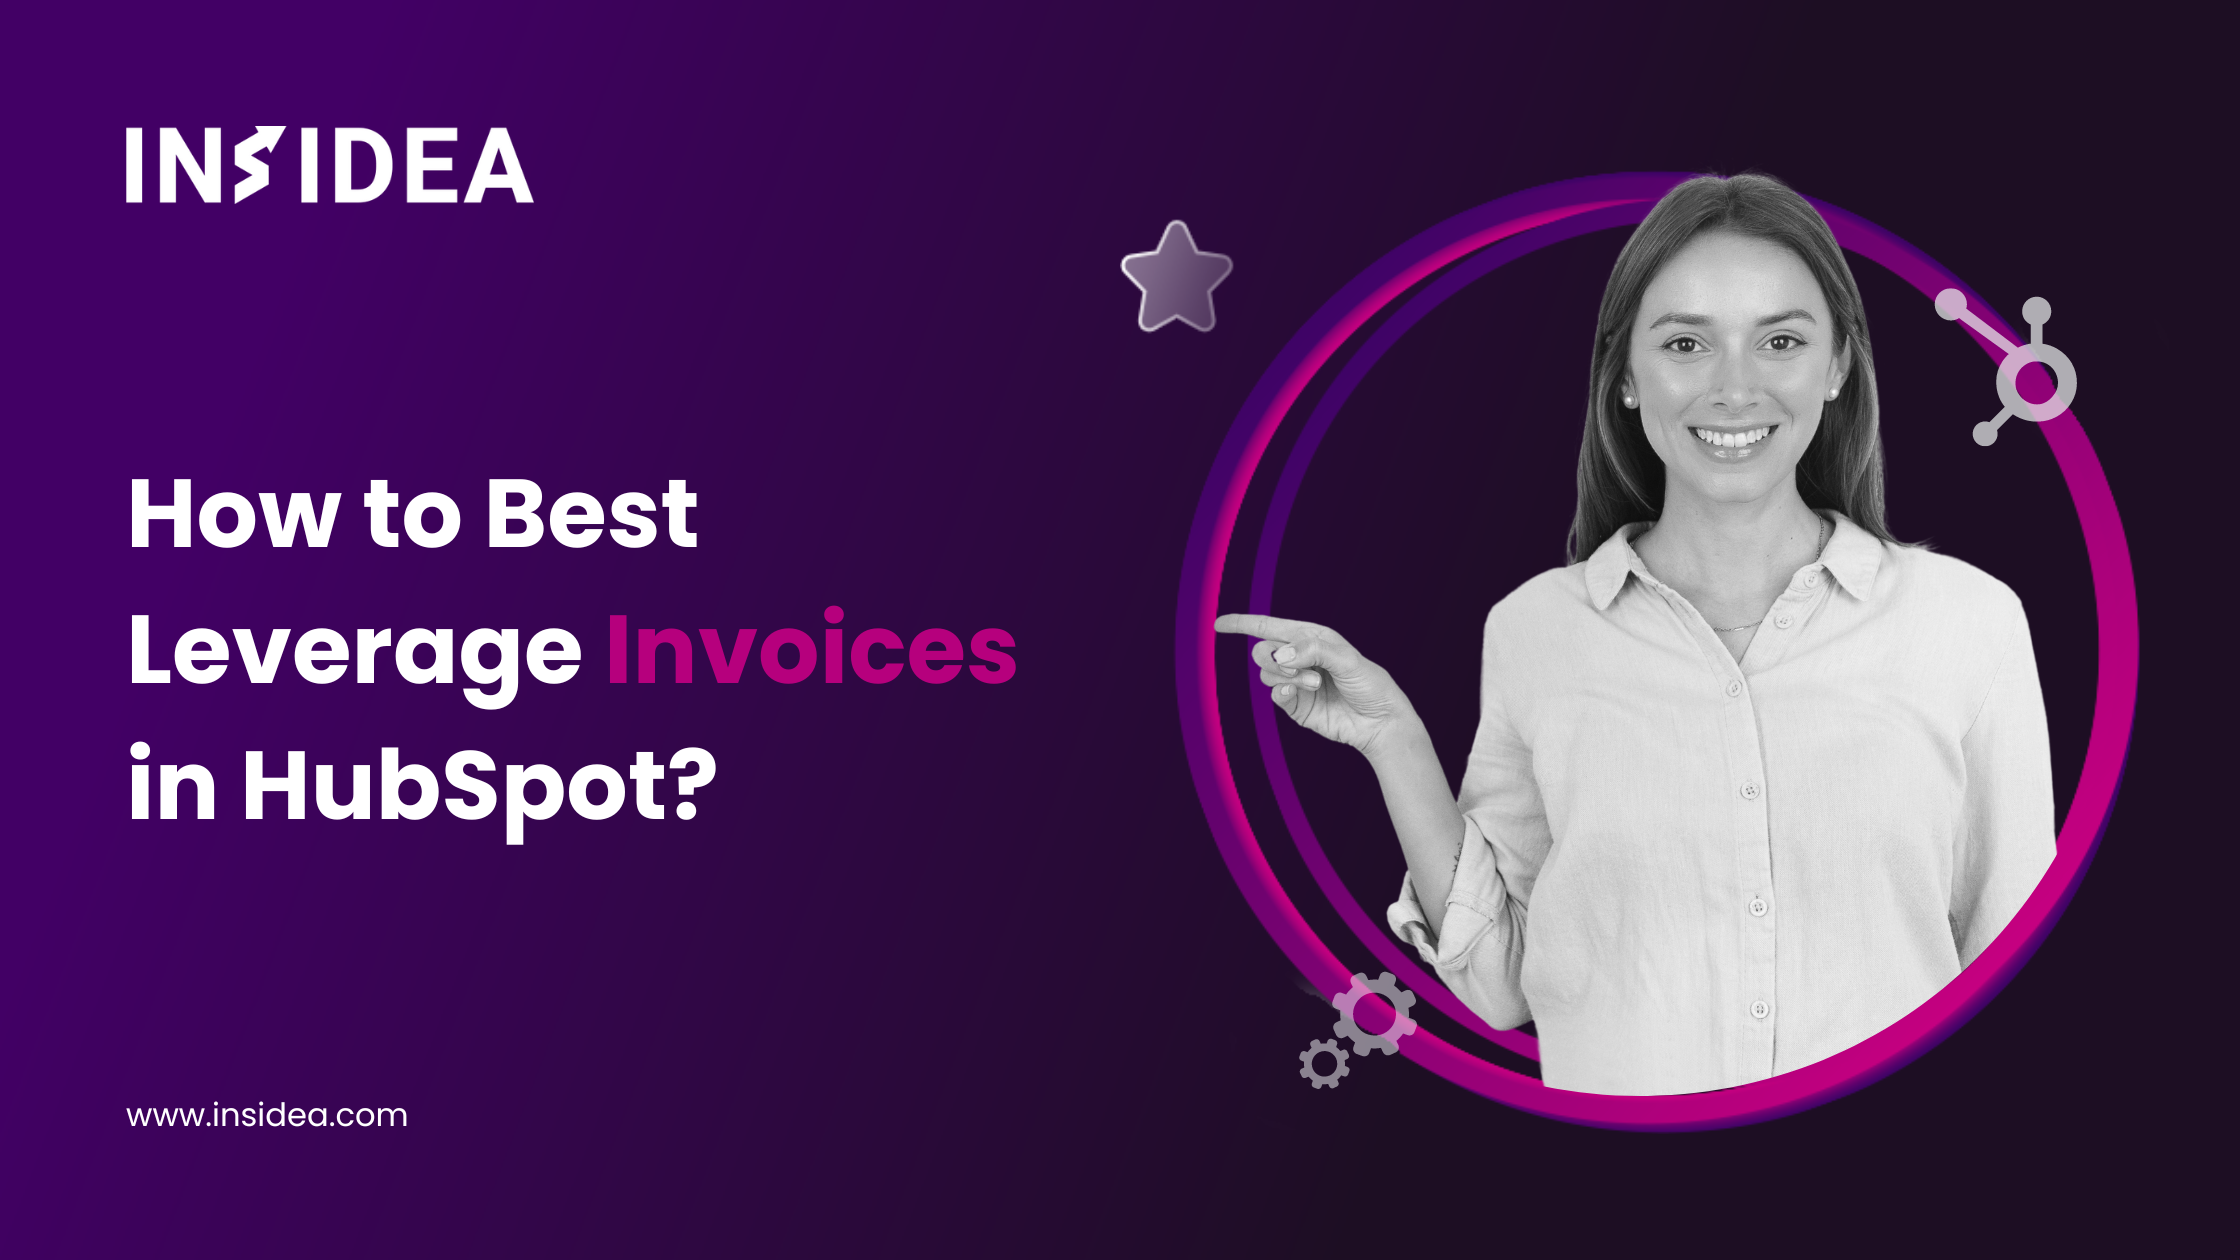 How to Best Leverage Invoices in HubSpot